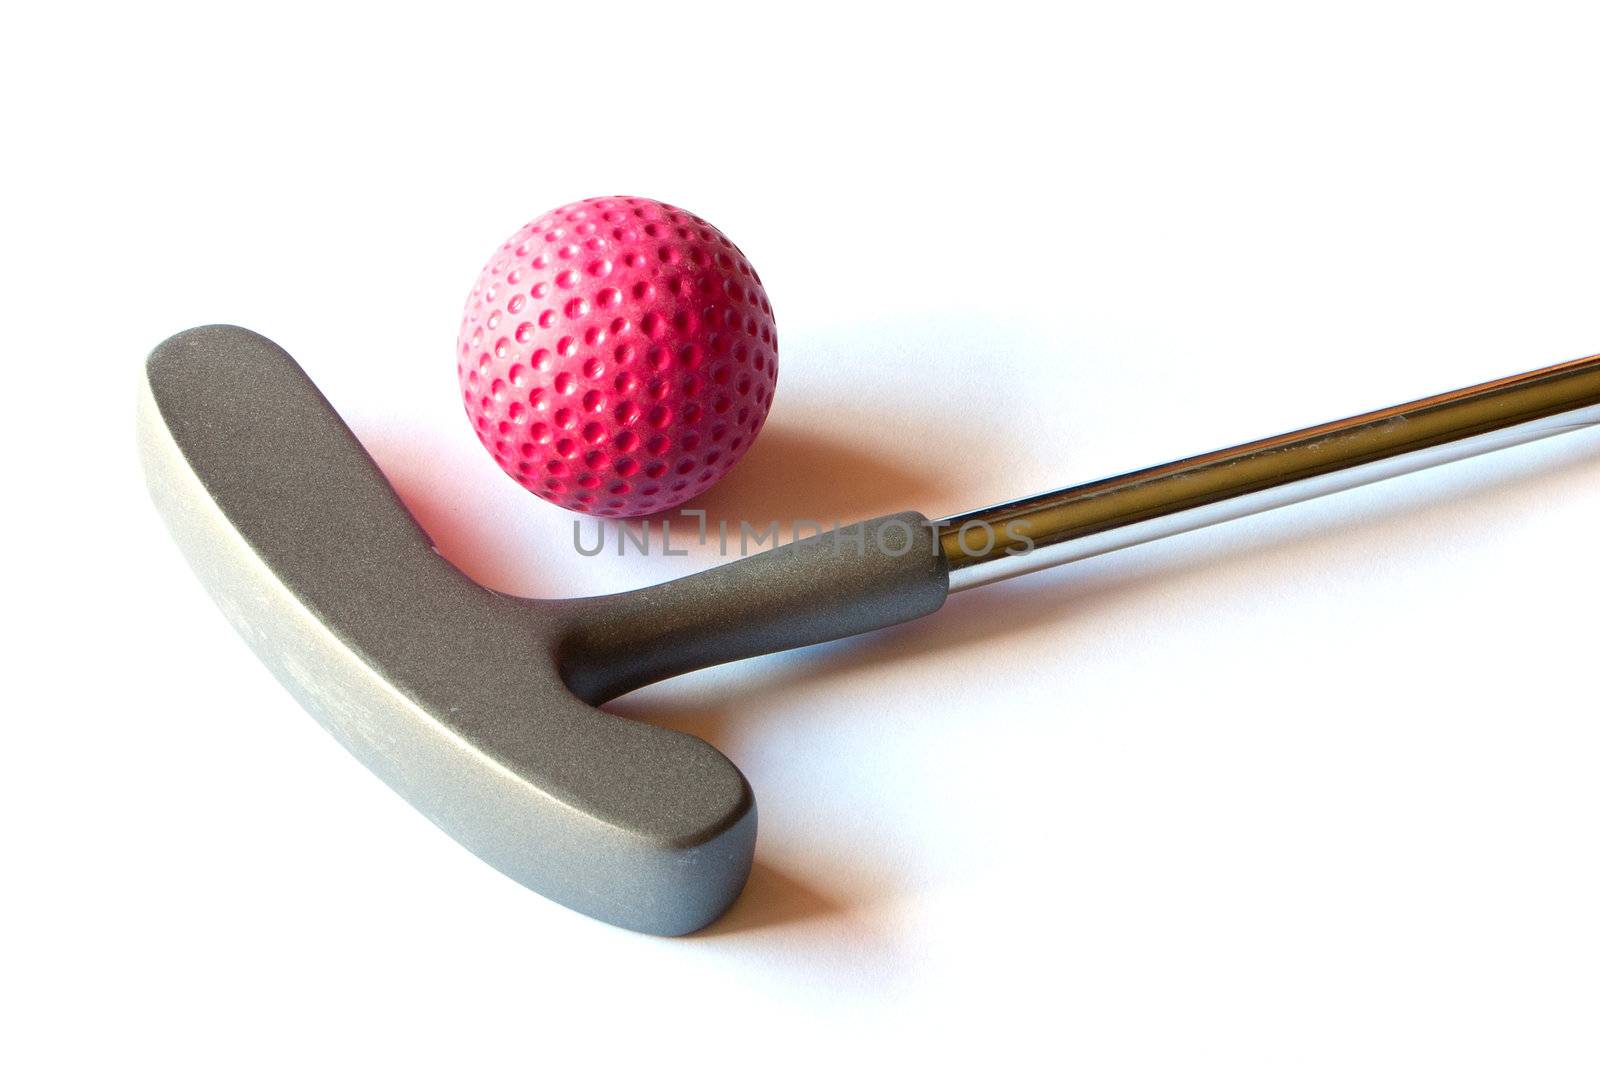 Mini Golf Stick with colored balls on an isolated background